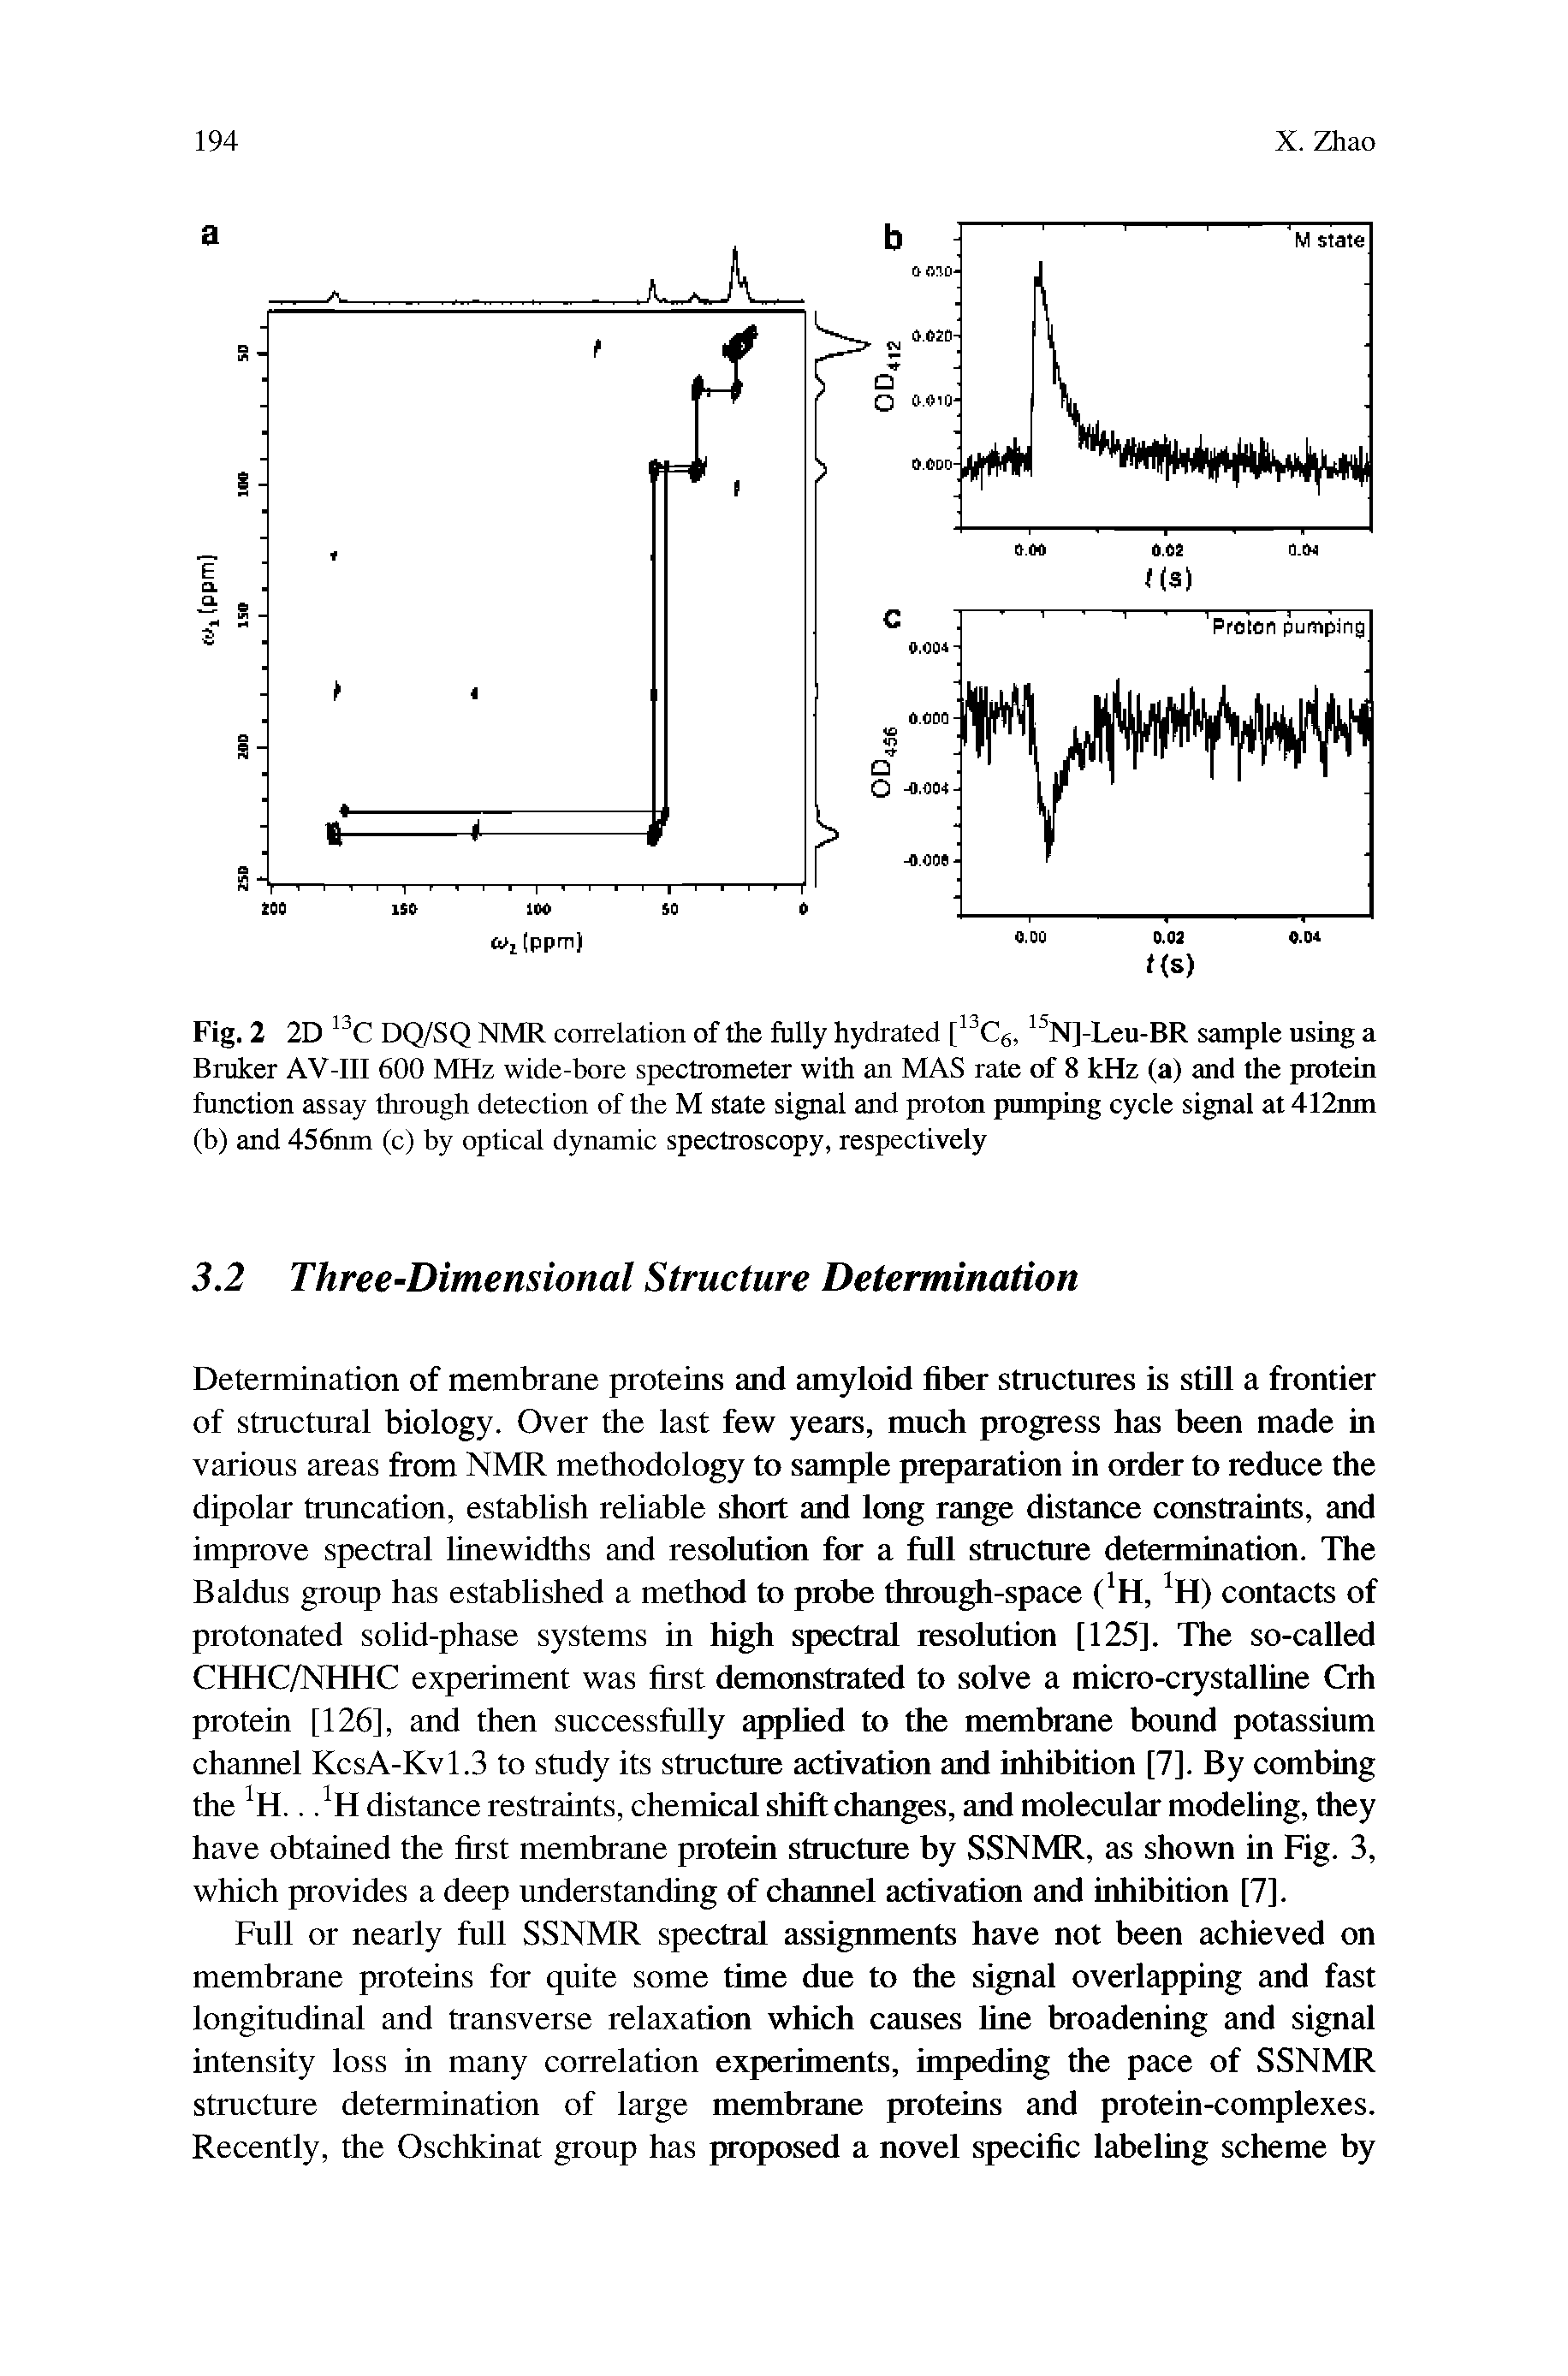 Fig. 2 2D DQ/SQ NMR correlation of the fully hydrated N]-Leu-BR sample using a Bruker AV-III 600 MHz wide-bore spectrometer with an MAS rate of 8 kHz (a) and the protein function assay through detection of the M state signal and proton pumping cycle signal at 412nm (b) and 456nm (c) by optical dynamic spectroscopy, respectively...